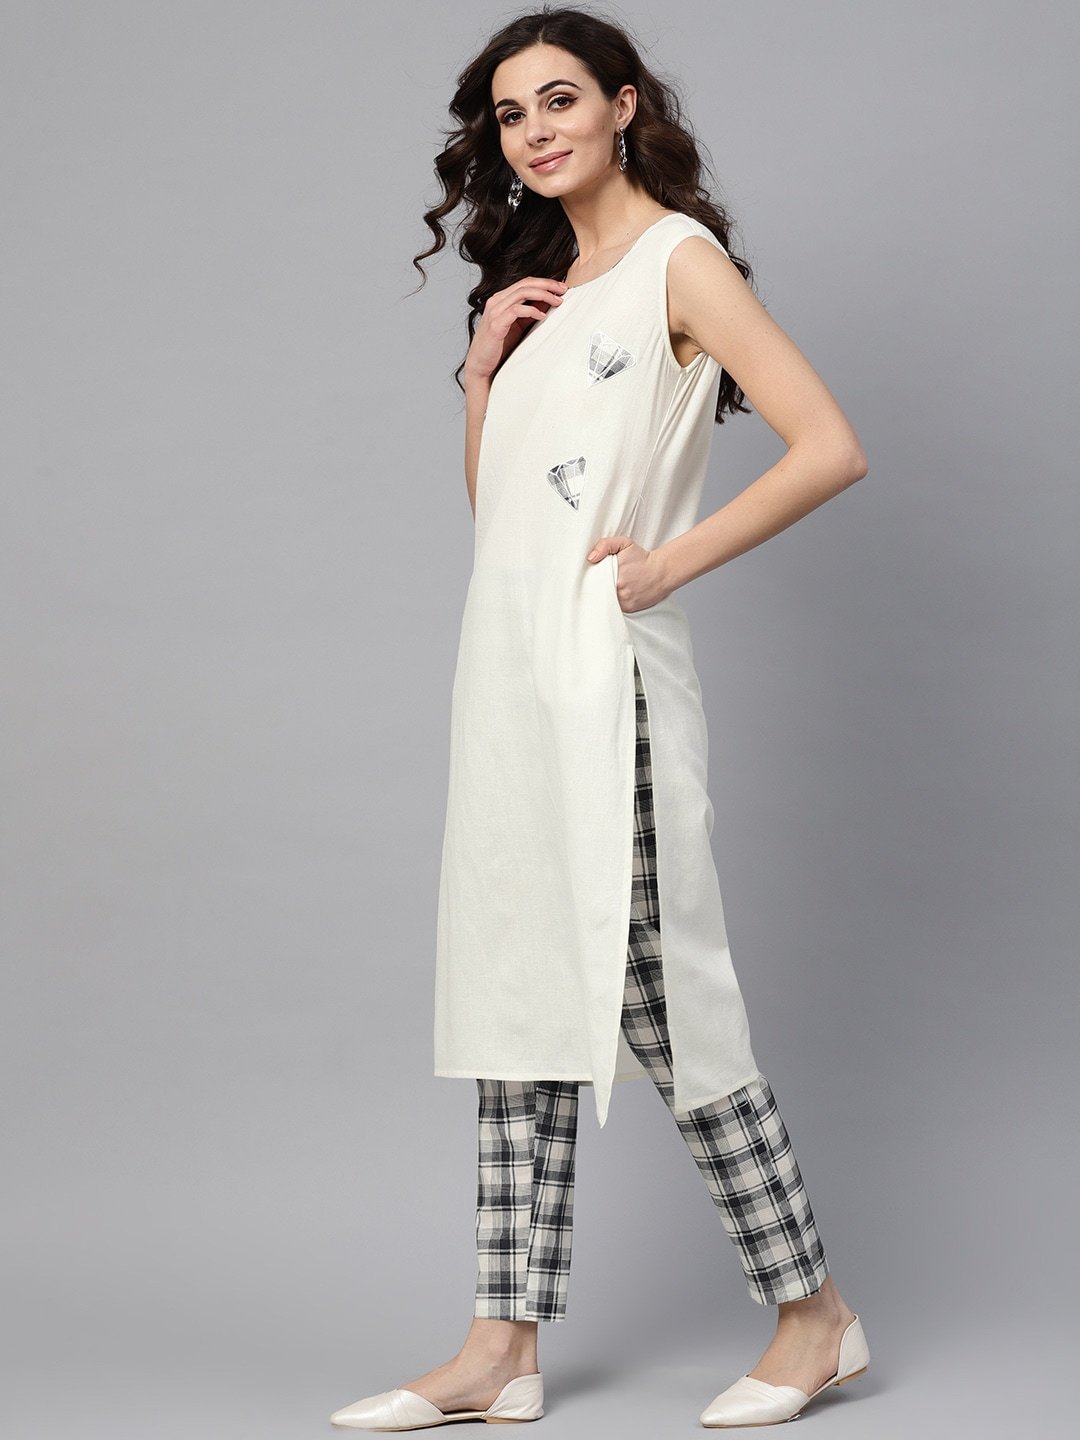 Women's  Off-White & Grey Solid Kurta with Trousers - AKS